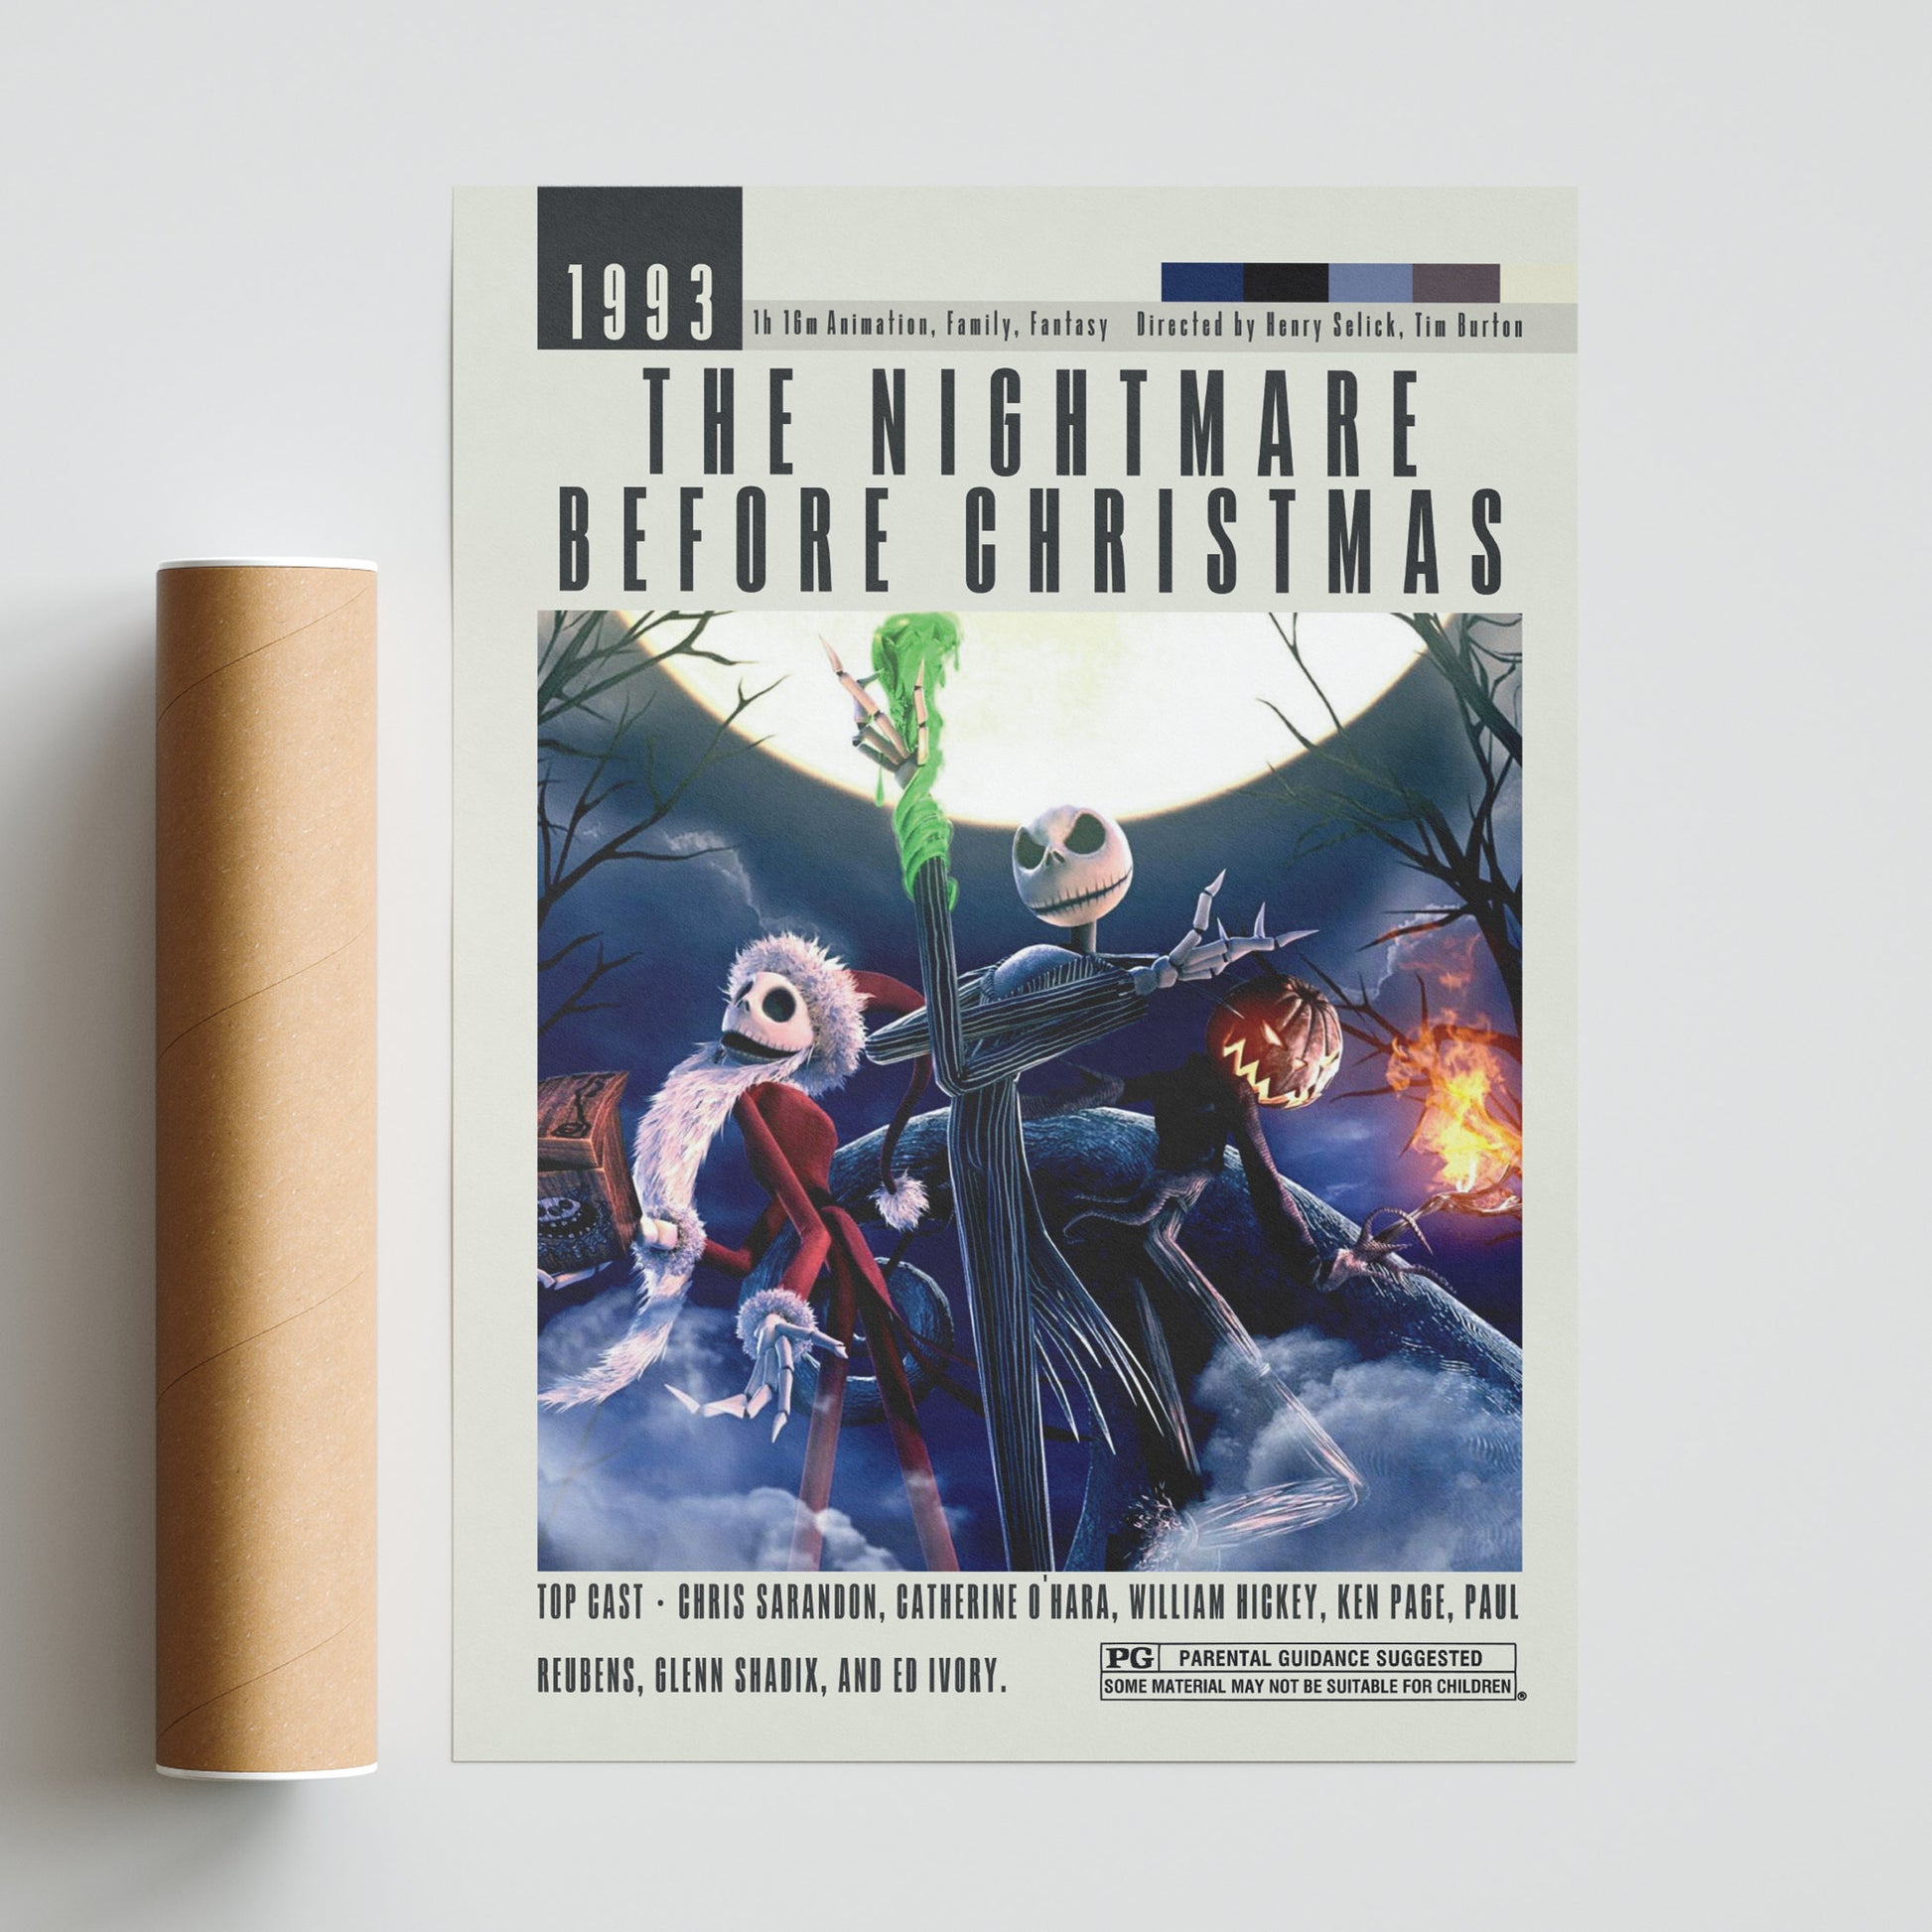 Enhance your movie collection with these original Nightmare Before Christmas posters from renowned director Tim Burton. Featuring large and vintage movie art, these custom and minimalist posters are perfect for any wall. Add a touch of vintage retro art to your home decor with these unframed movie posters, available at an affordable price in the UK.